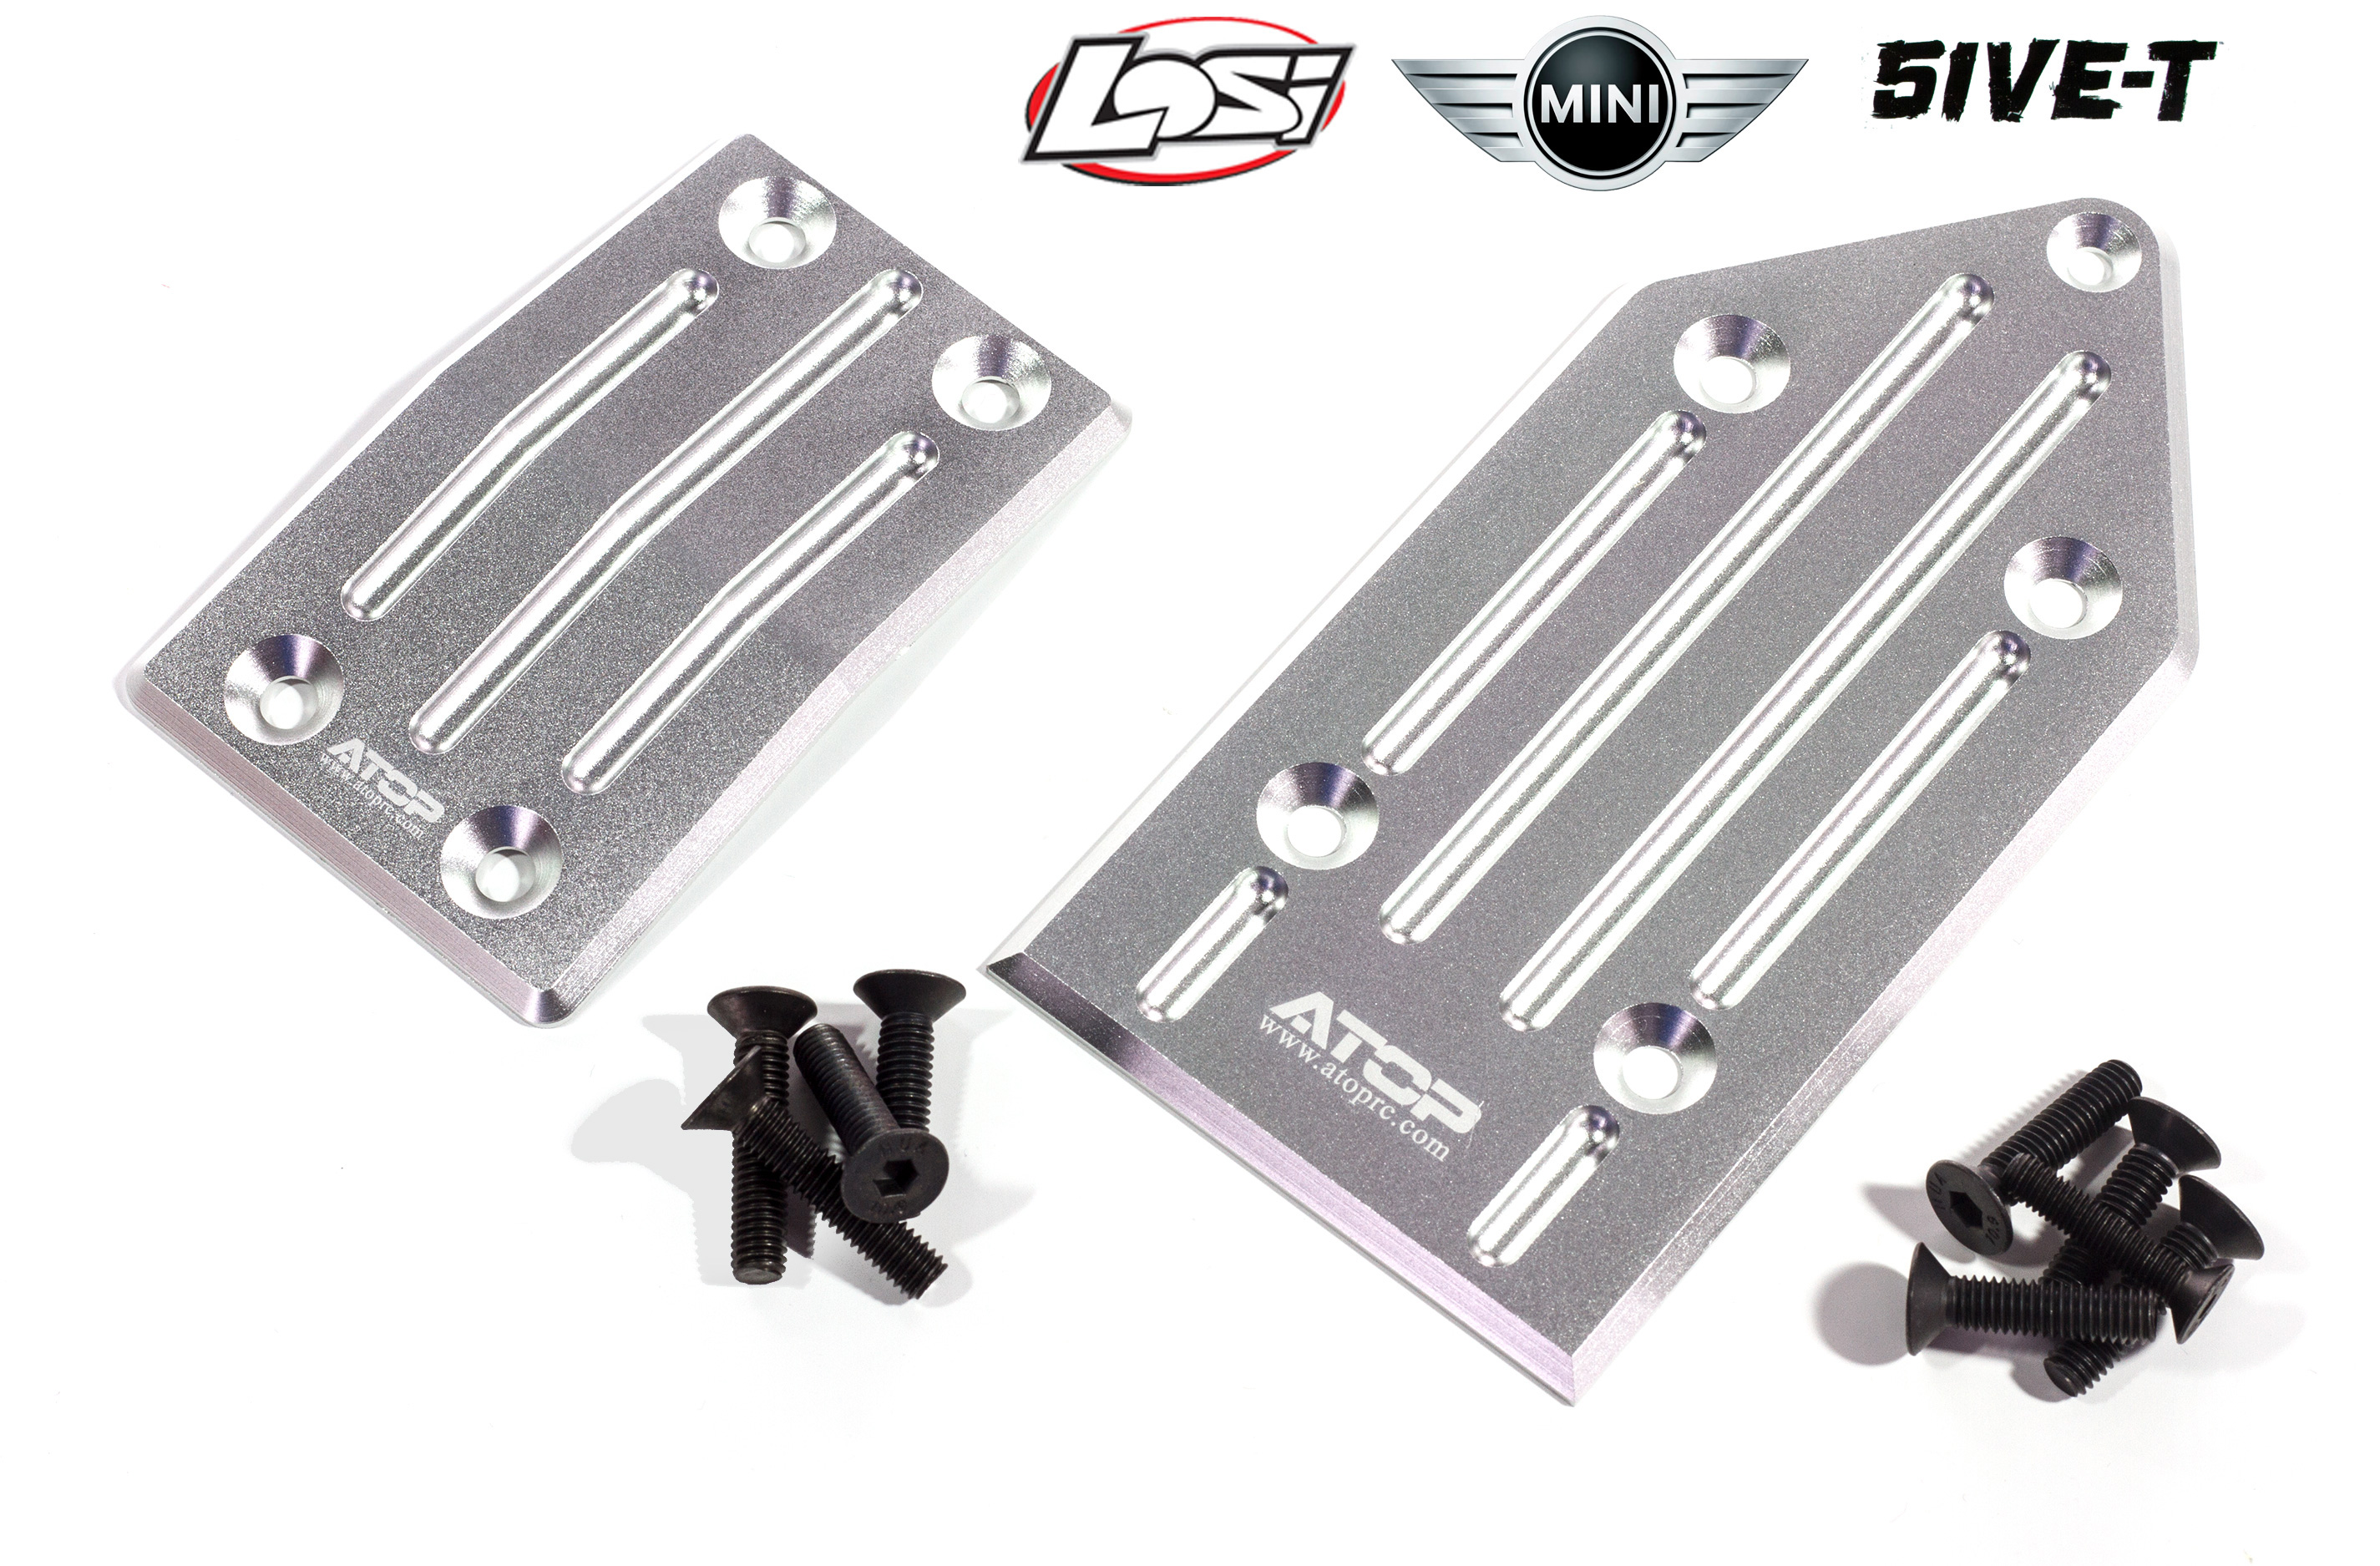 AT-5T006/007 ATOP Aluminum front and rear skid plate Losi 5ive-T/2.0 and Mini